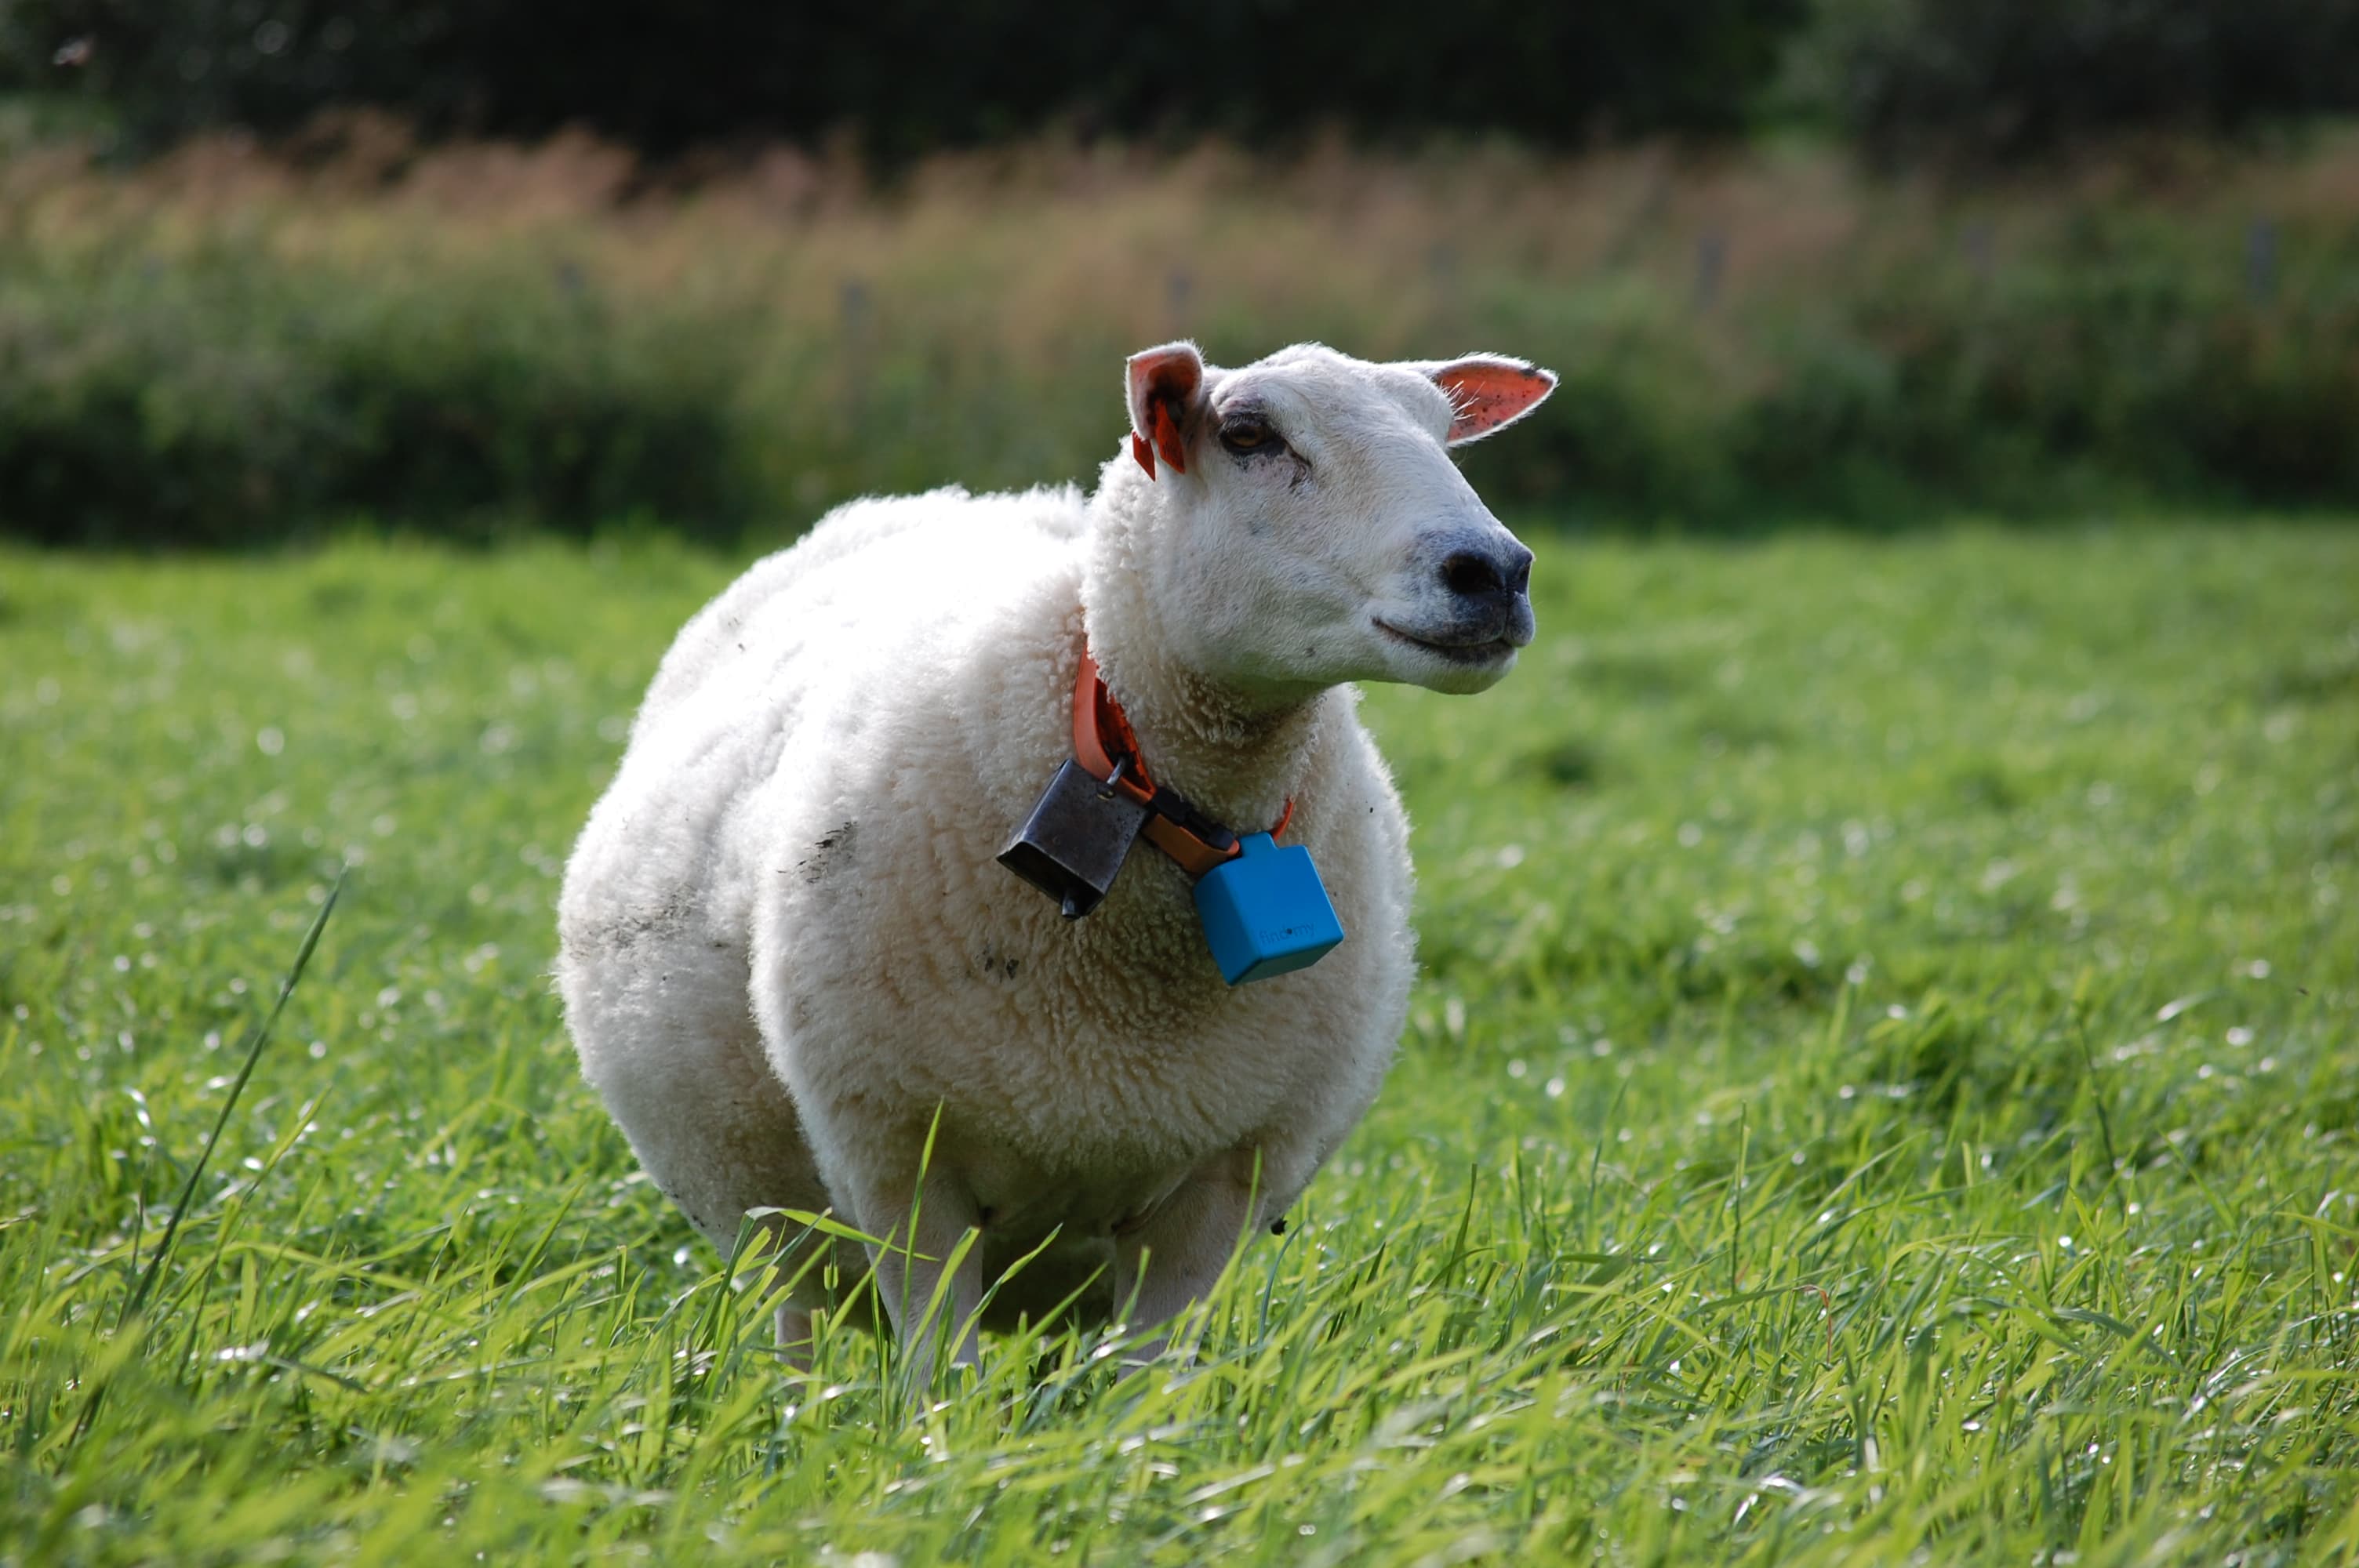 Sheep with blue e-bell